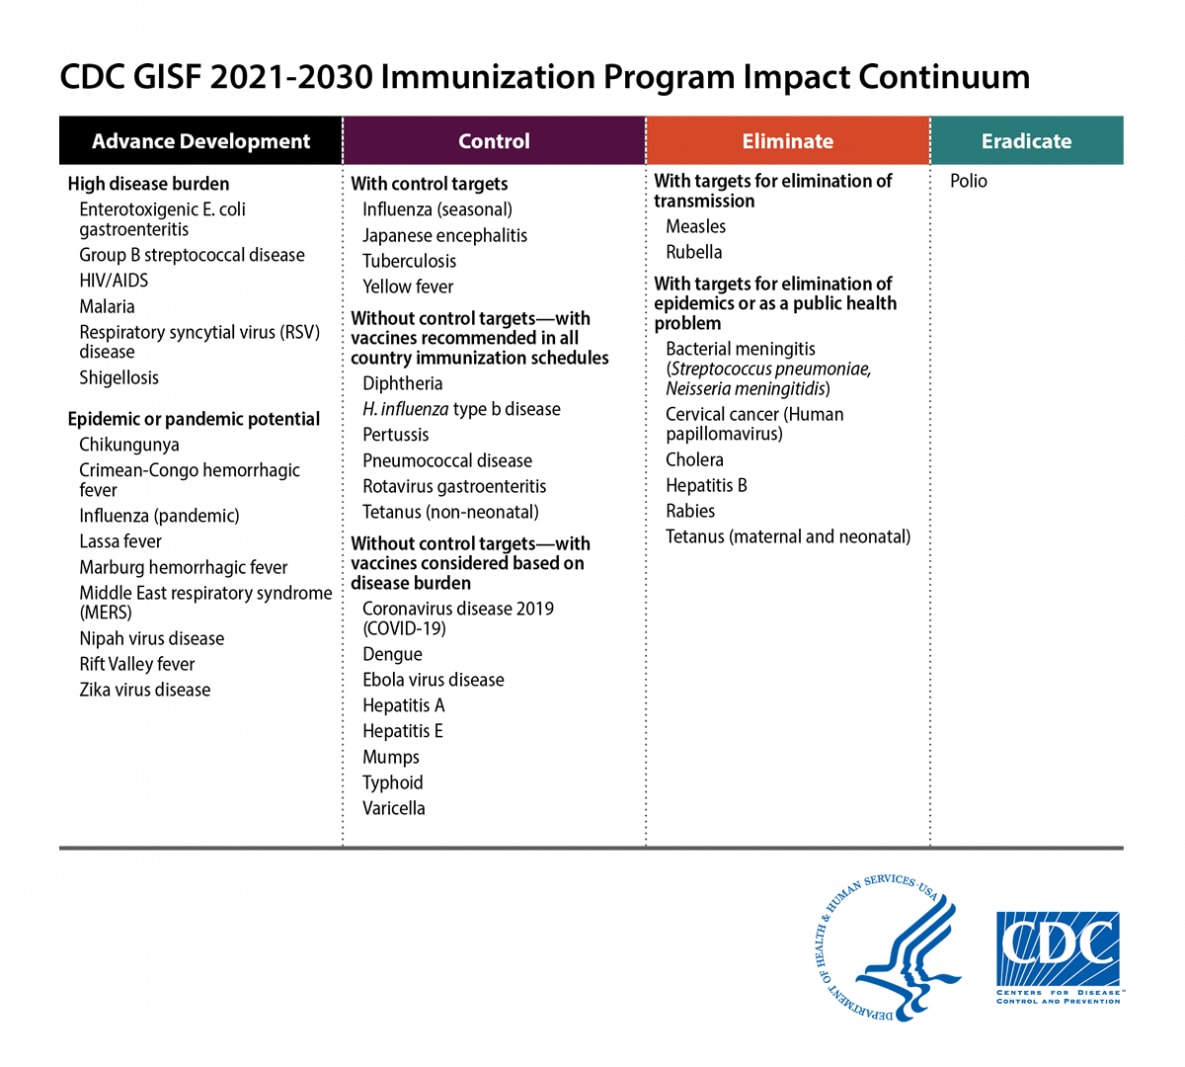 CDC's GISF 2021-2030 Immunization Program Impact Continuum focuses on vaccine preventable diseases with eradication, elimination, and control targets.